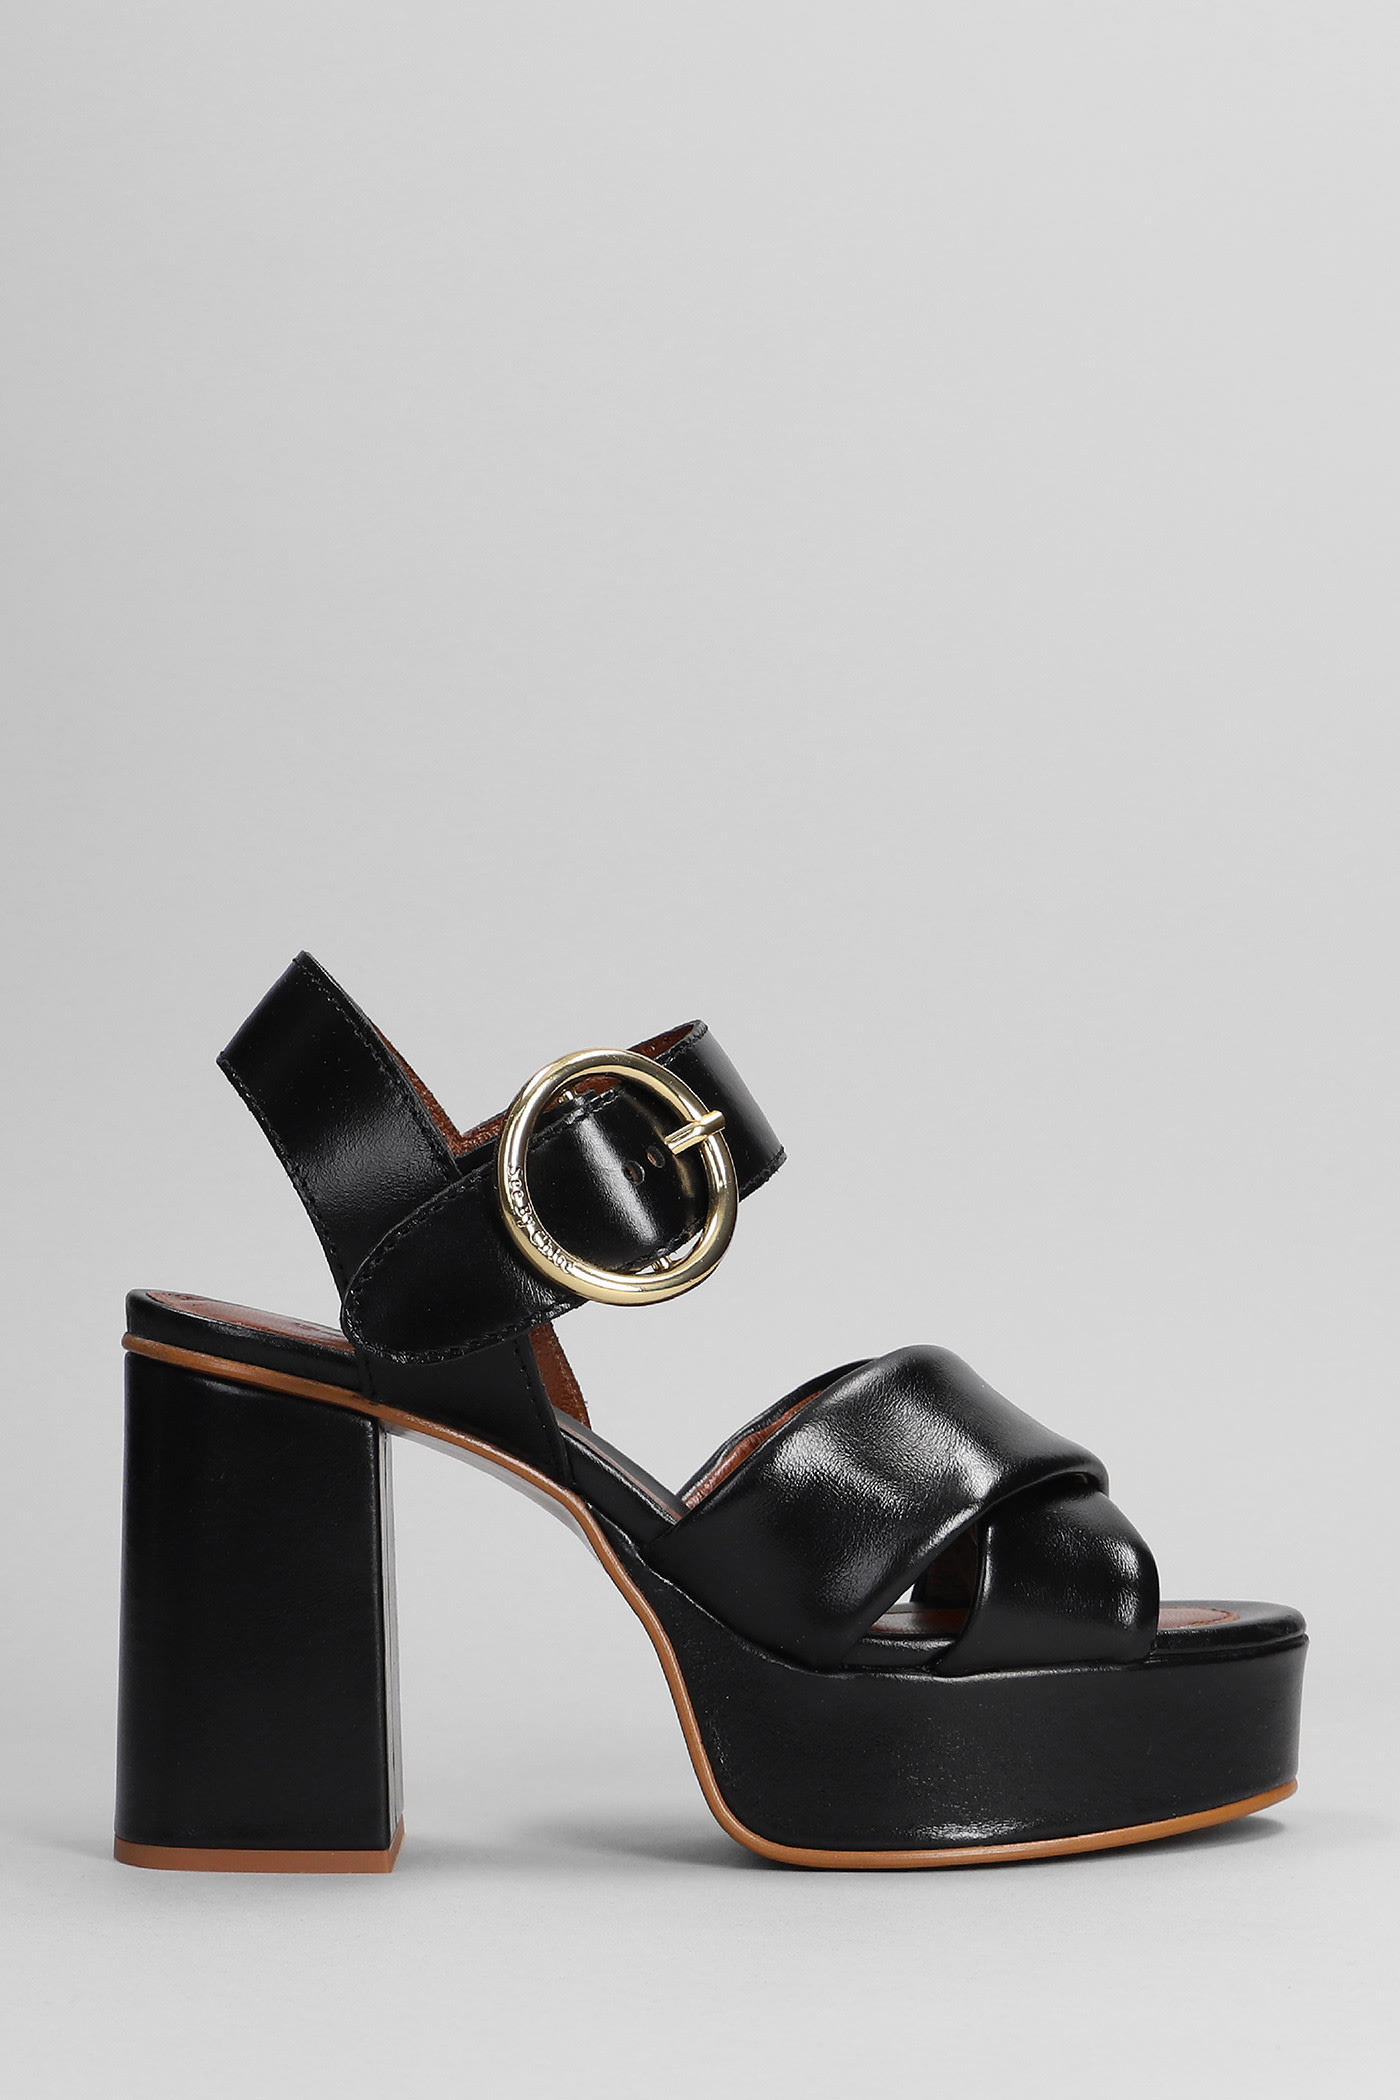 SEE BY CHLOÉ LYNA SANDALS IN BLACK LEATHER